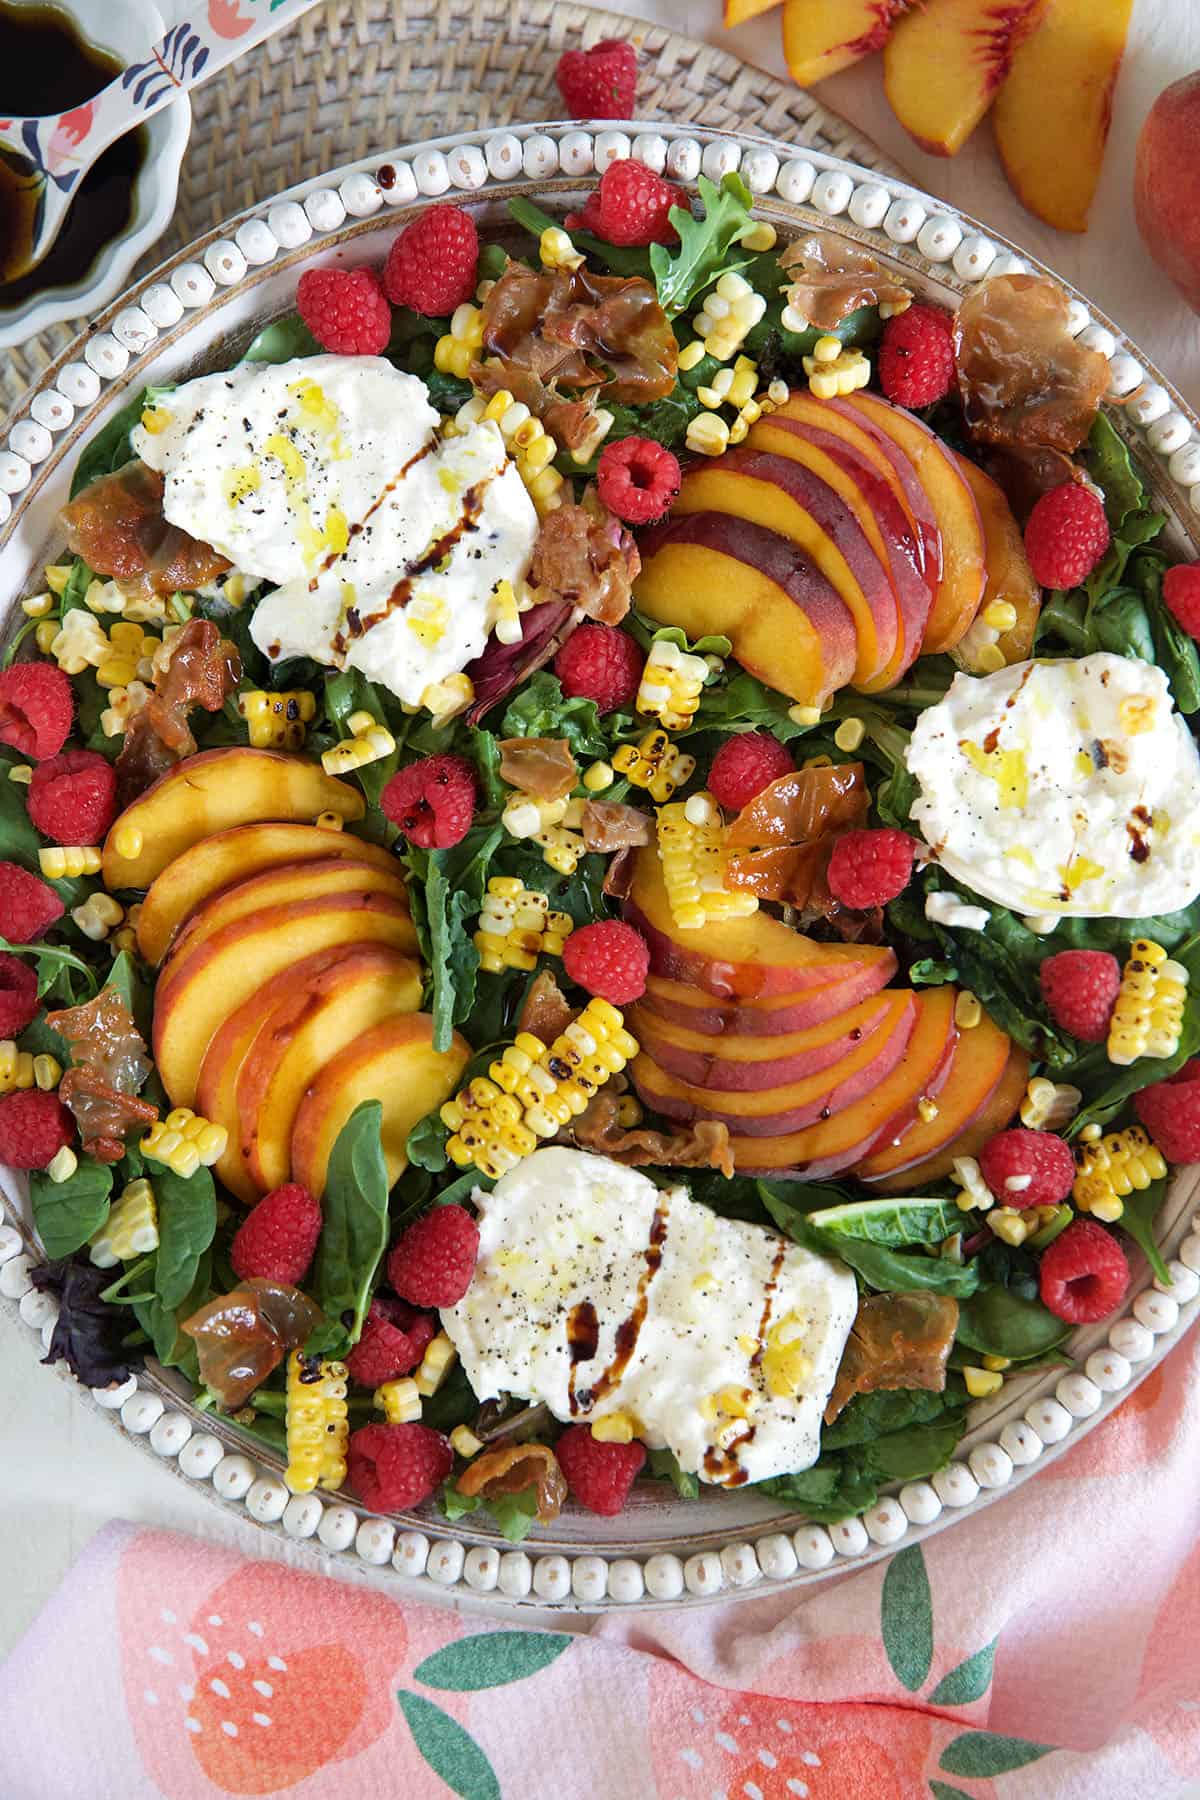 Salad made with peaches and burrata cheese with raspberries.